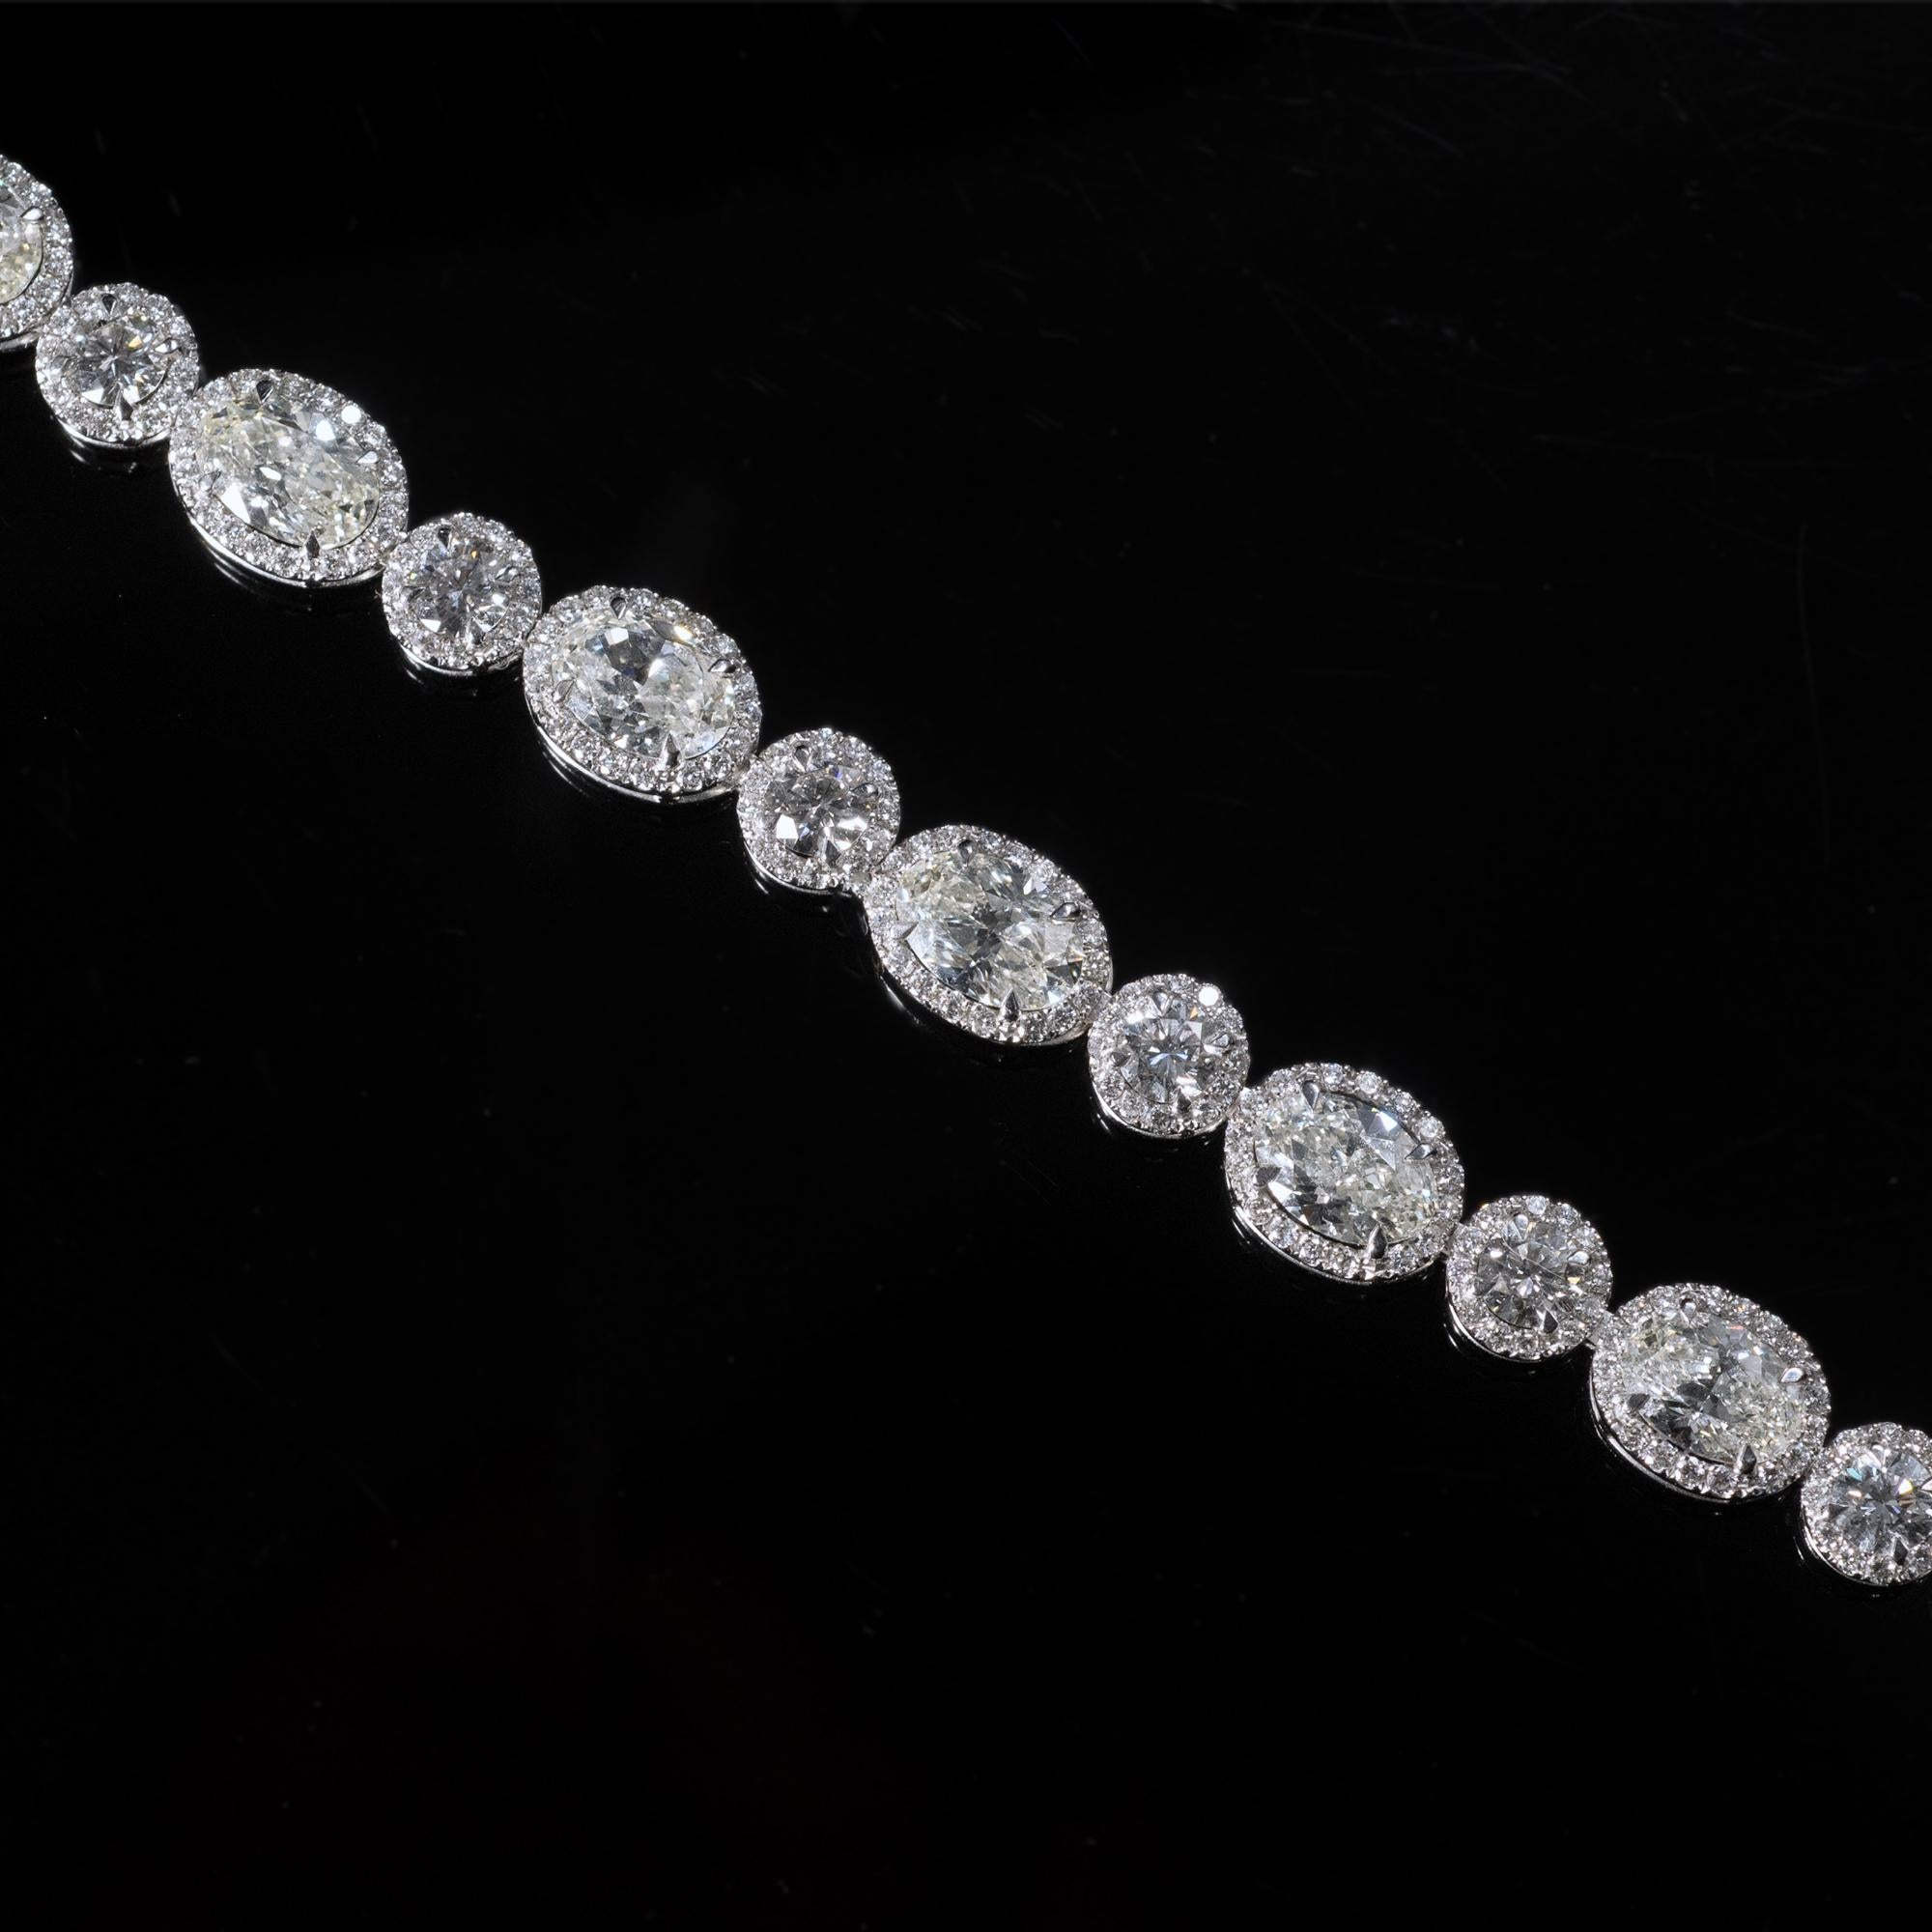 Exceptional 18 karat gold and diamond tennis bracelet: Twelve oval cut diamond about 0.75 carat each alternating with twelve round brilliant cut diamond each about 0.22 carat. 
Each of these central stones are surrounded in a halo like pattern by